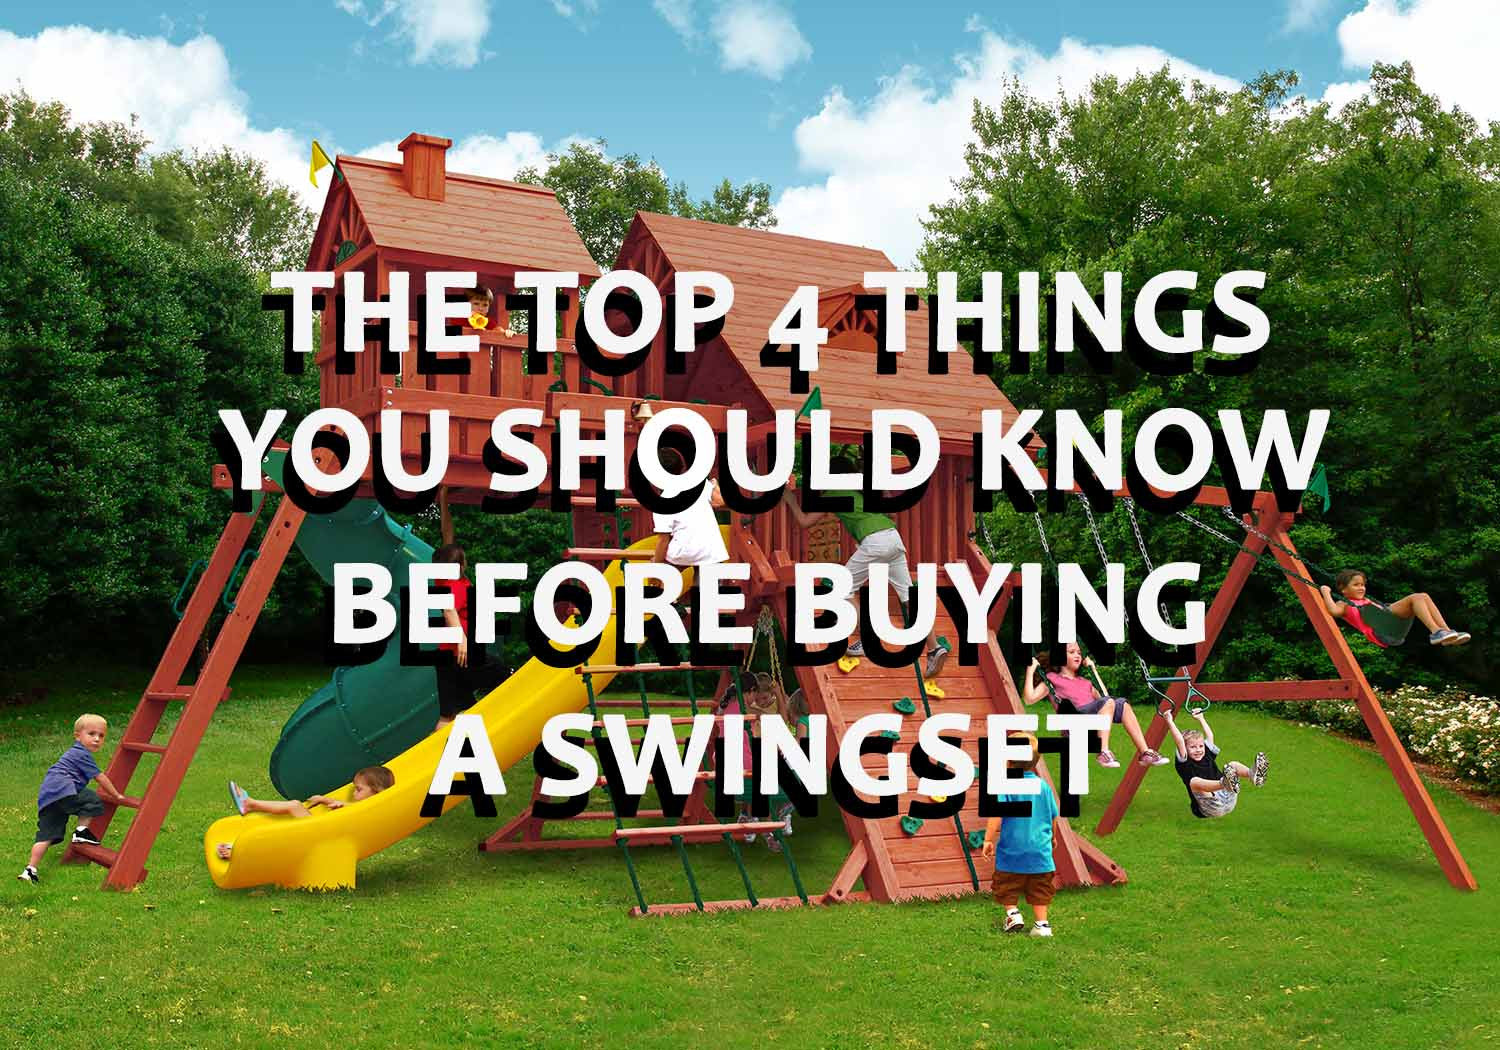 The Top 4 Things You Should Know About a Swing Set Before Buying One